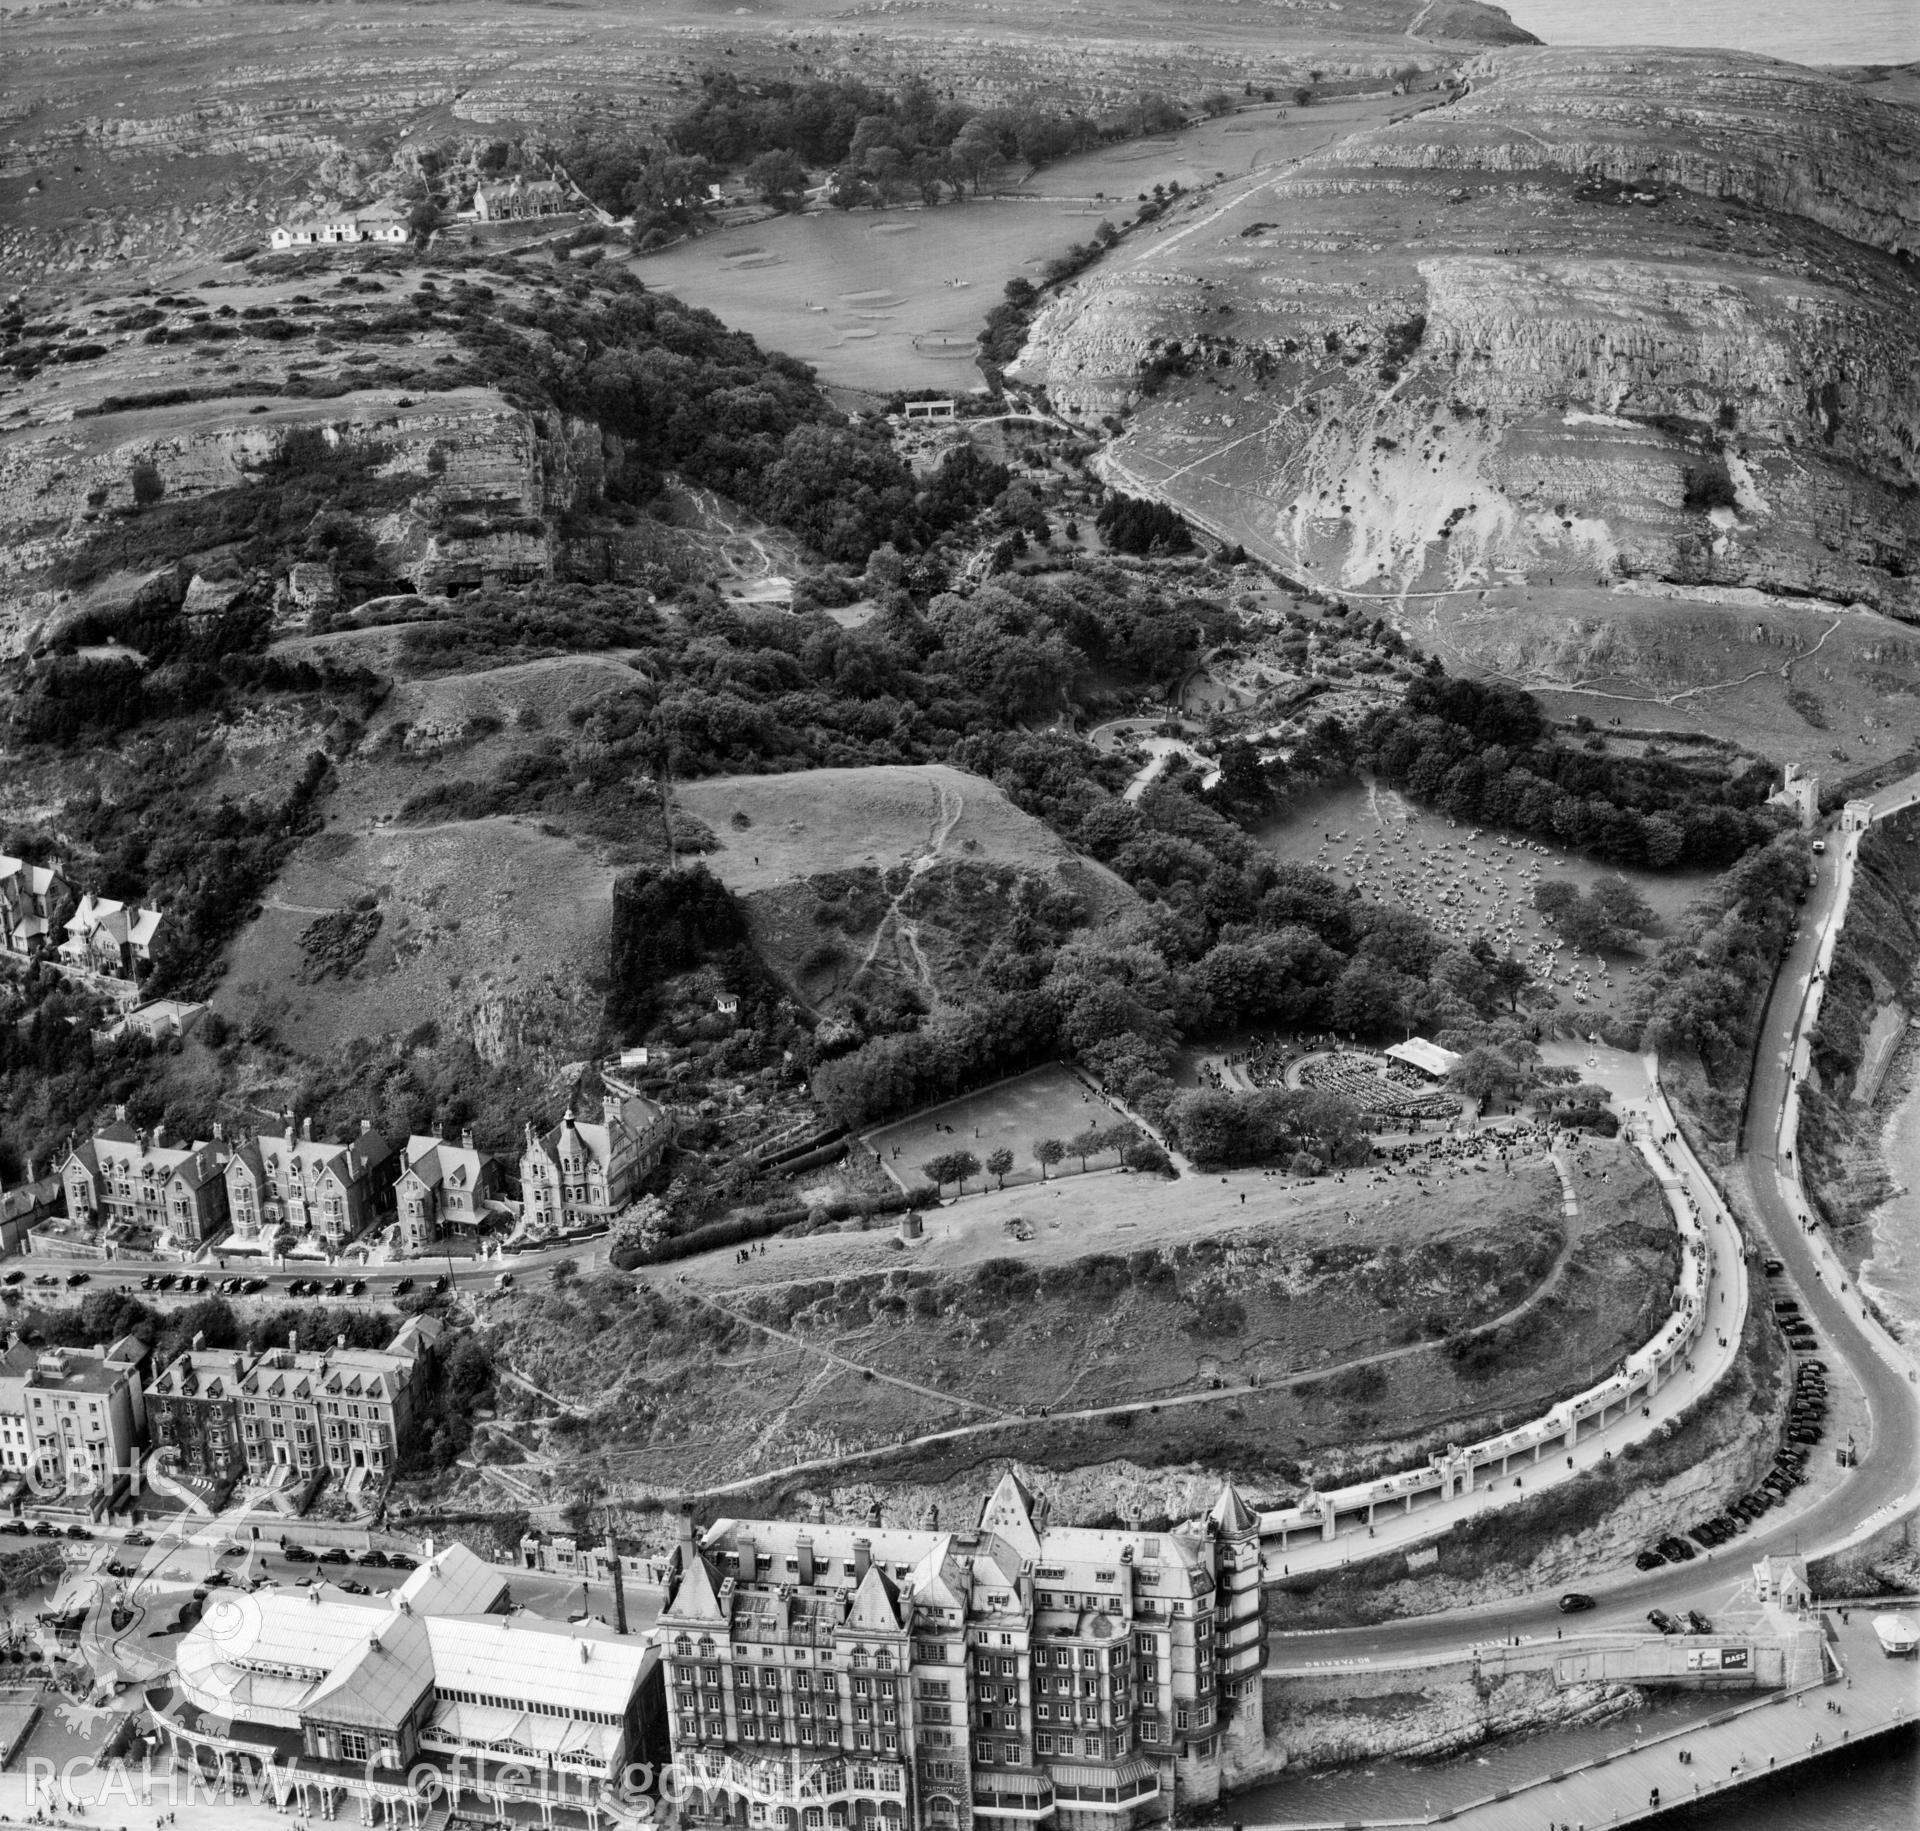 View of Llandudno showing Happy Valley area, pavillion and Grand Hotel